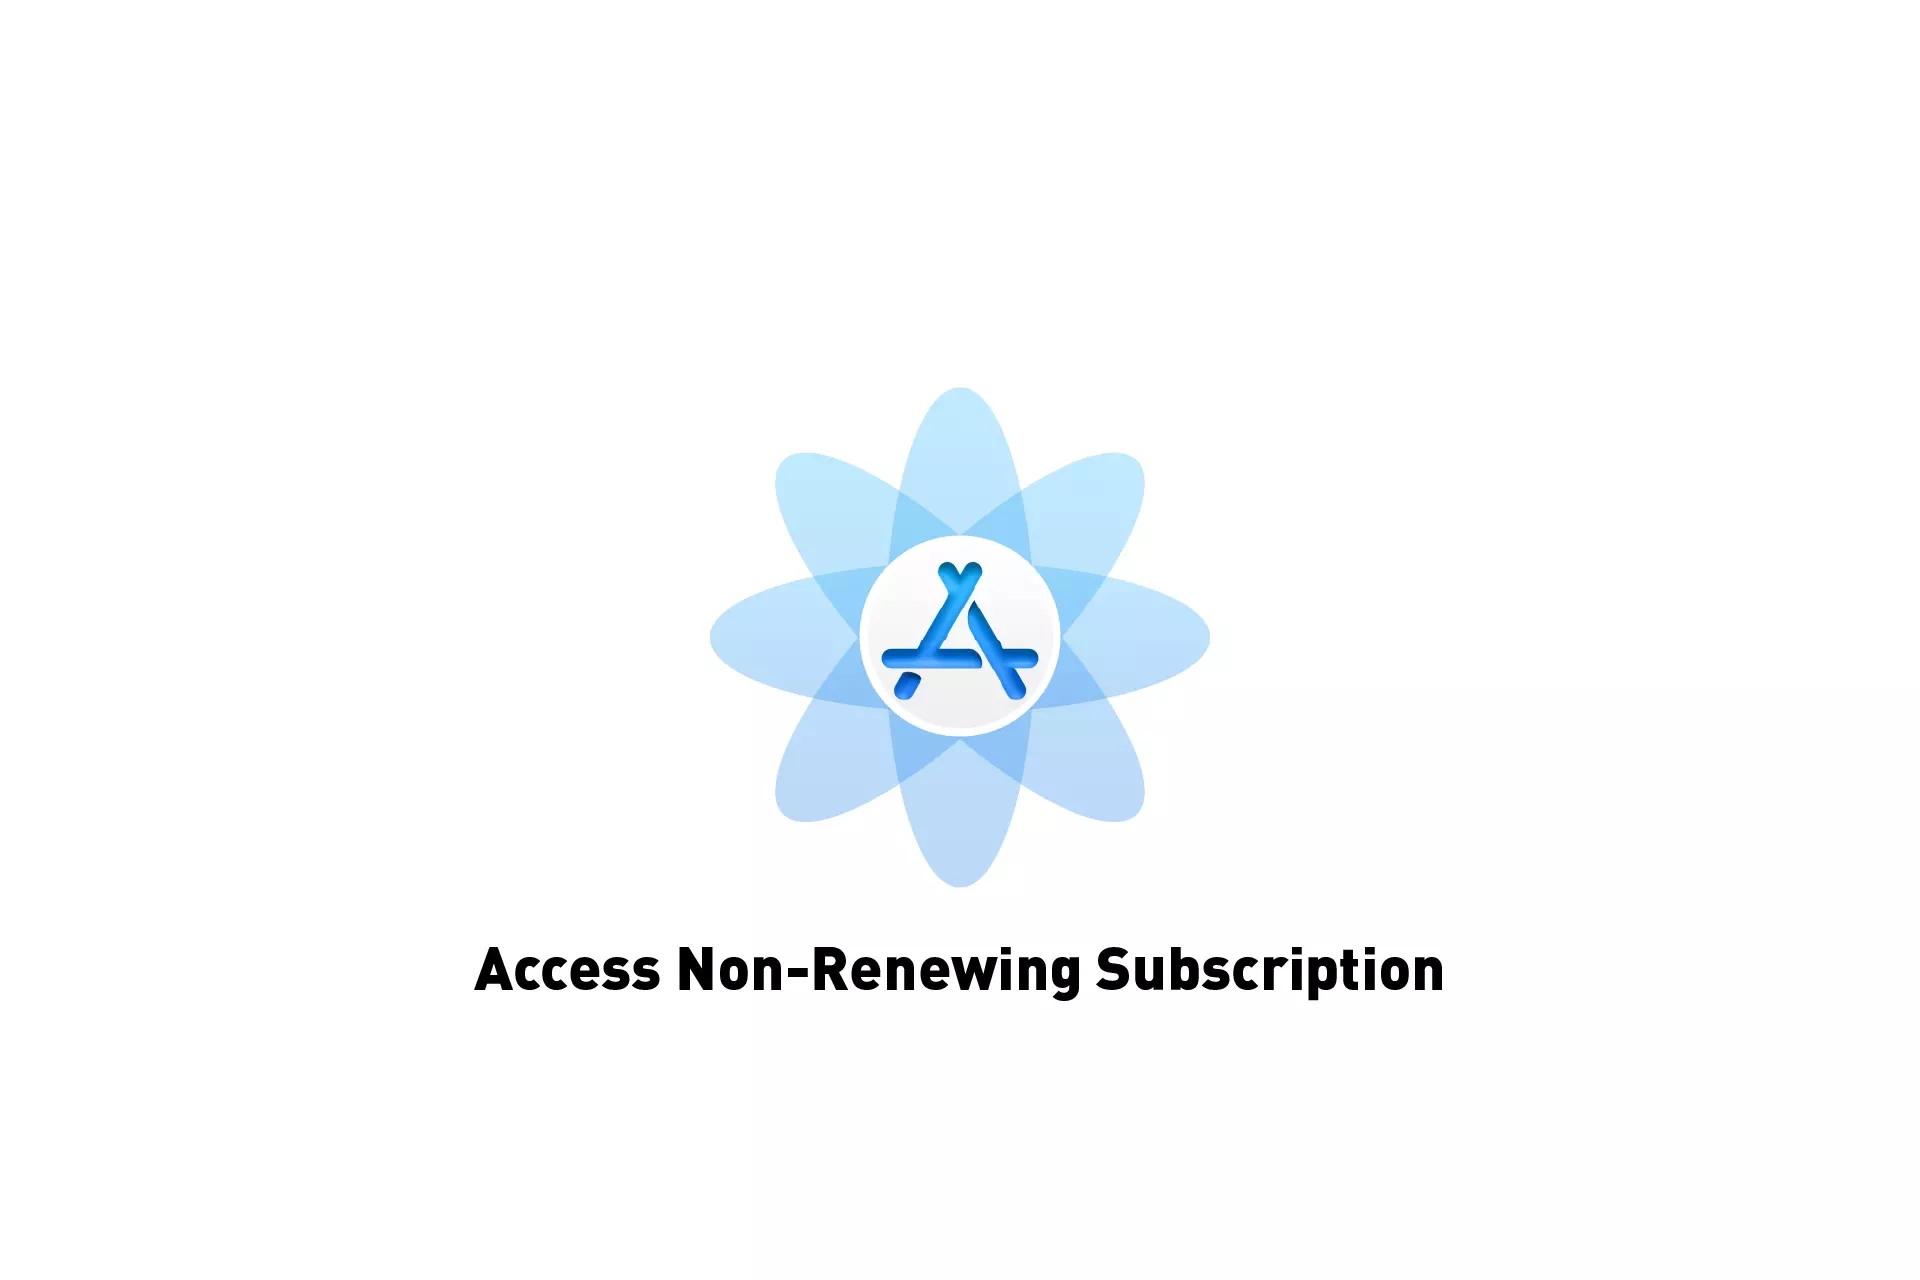 A flower that represents App Store Connect with the text "Access Non-Renewing Subscription" beneath it.